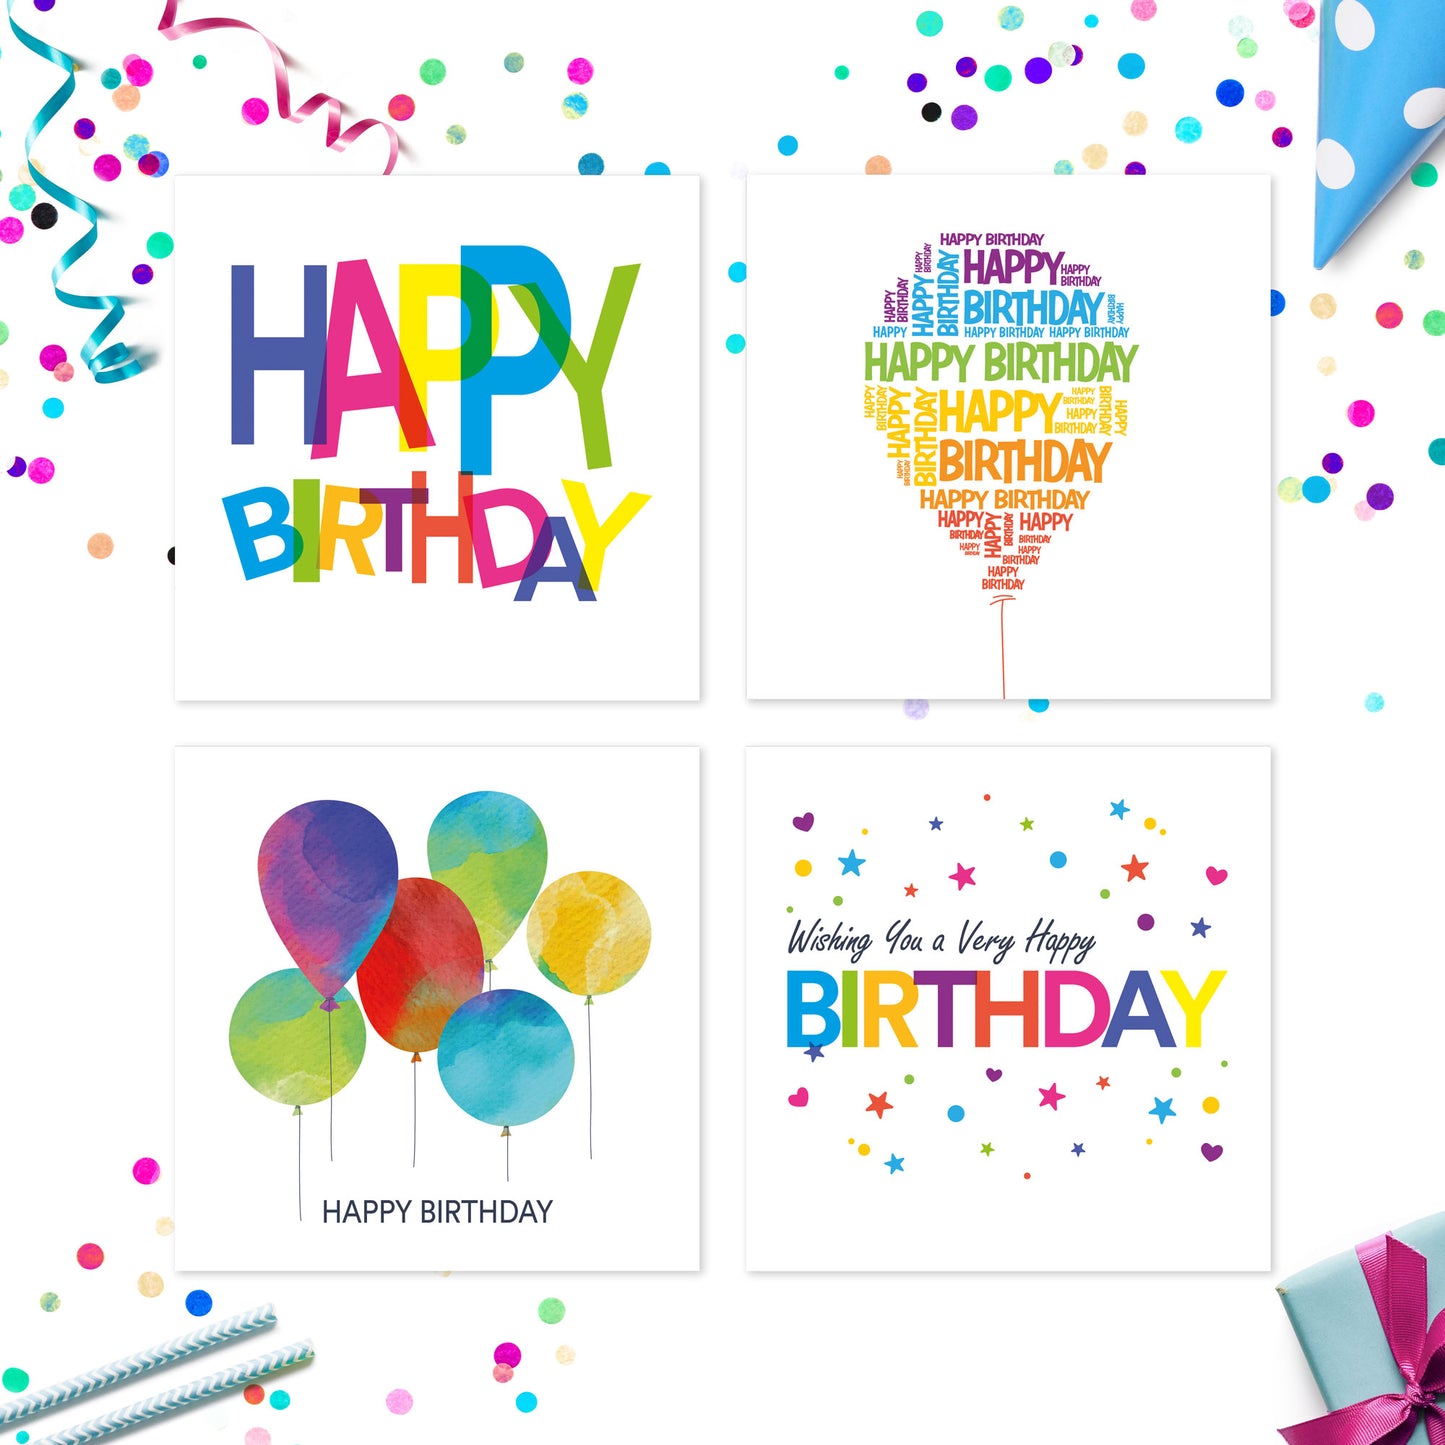 Pack of Birthday Cards | 20 Cards + 20 Envelopes | Suitable for all Volume 4